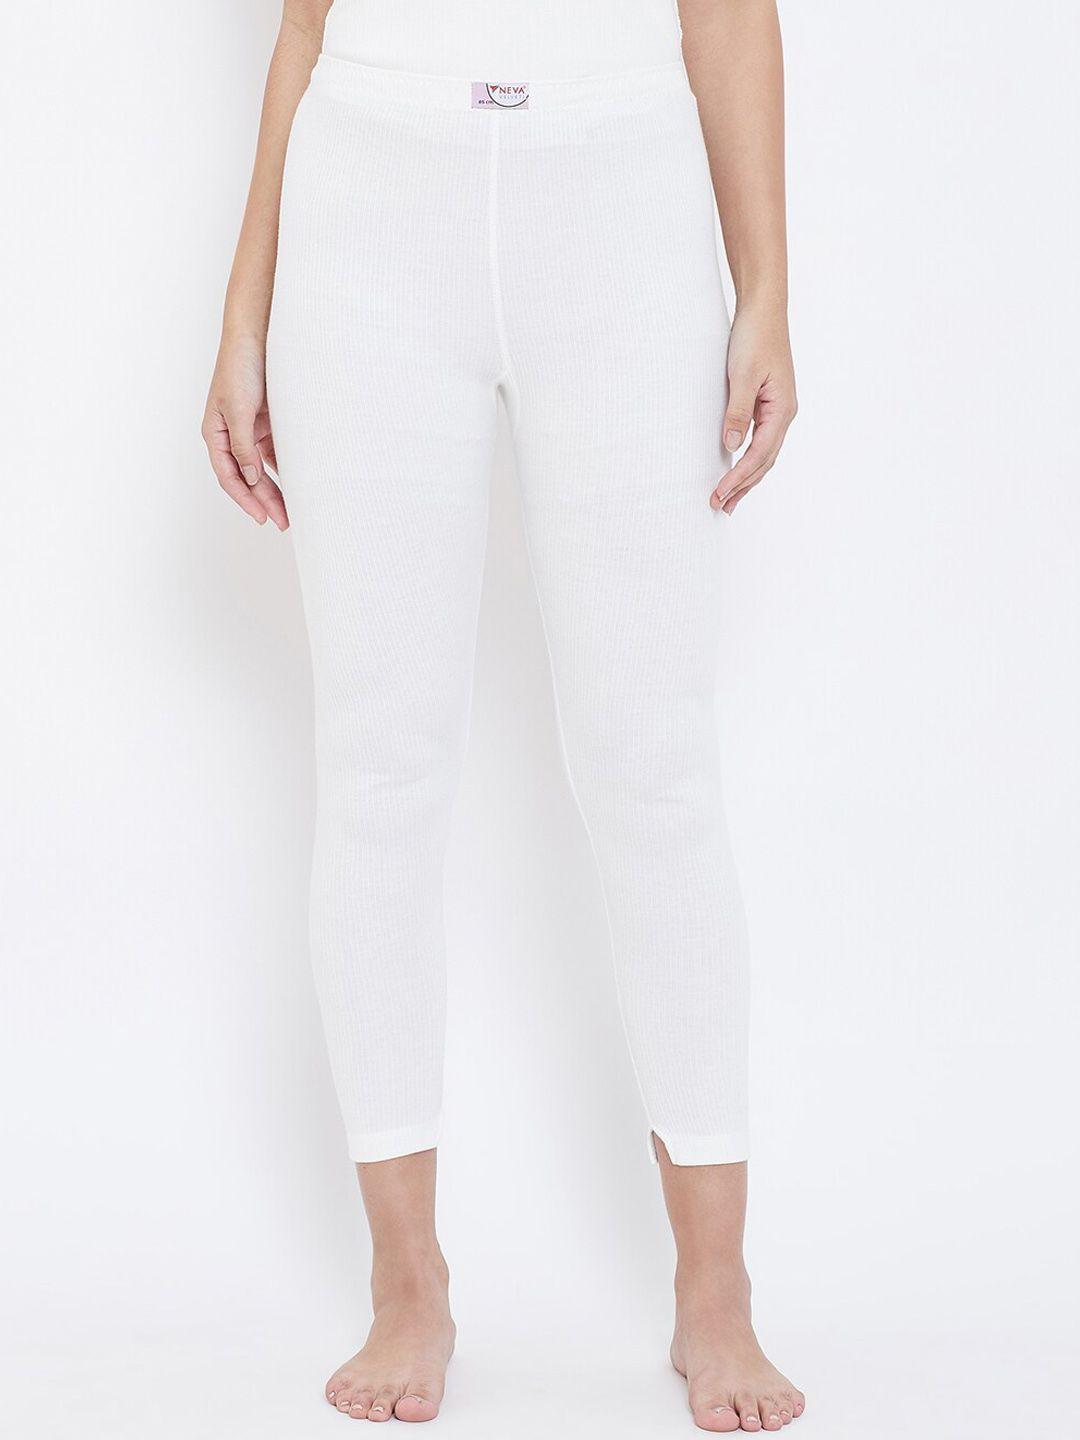 neva women off white patterned three-fourth length thermal bottoms